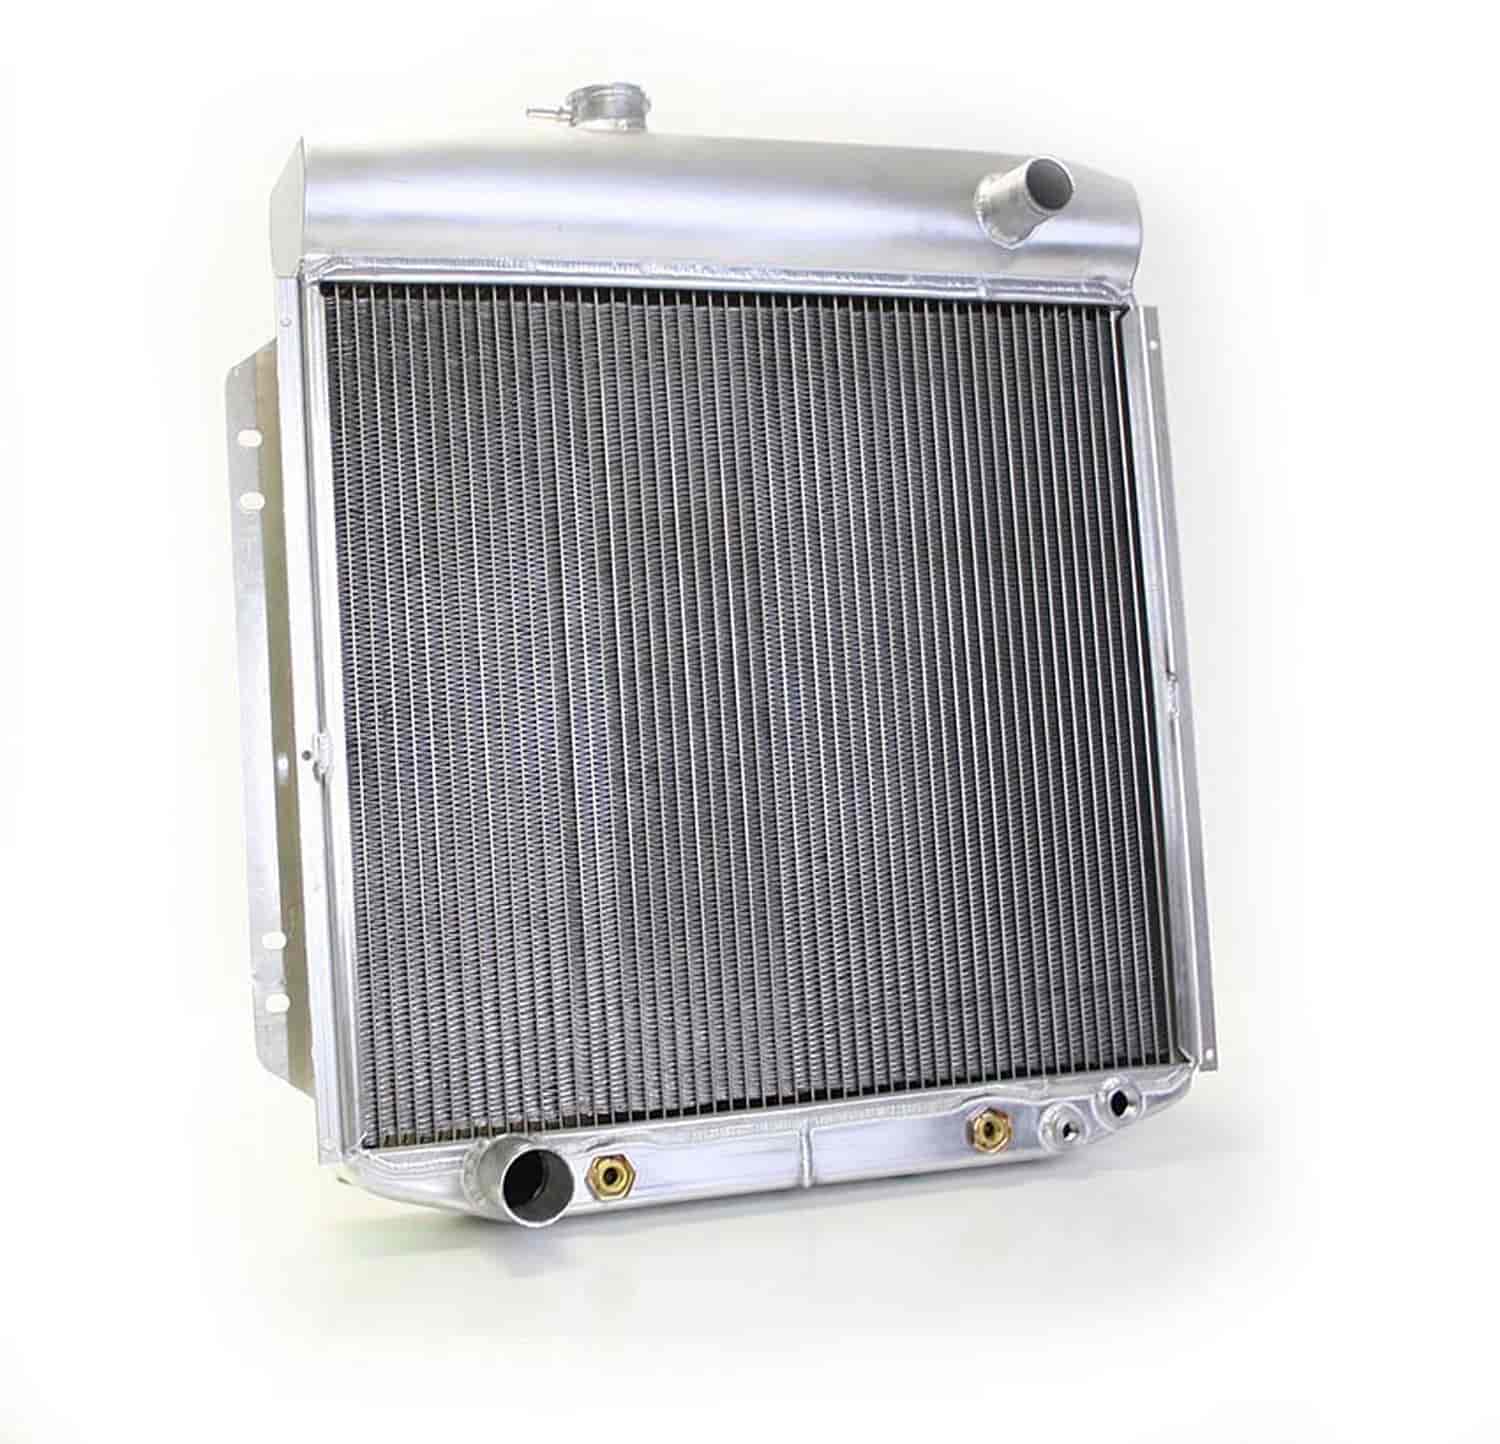 ExactFit Radiator for 1953-1956 Ford Truck with Late Ford Small Block or Big Block